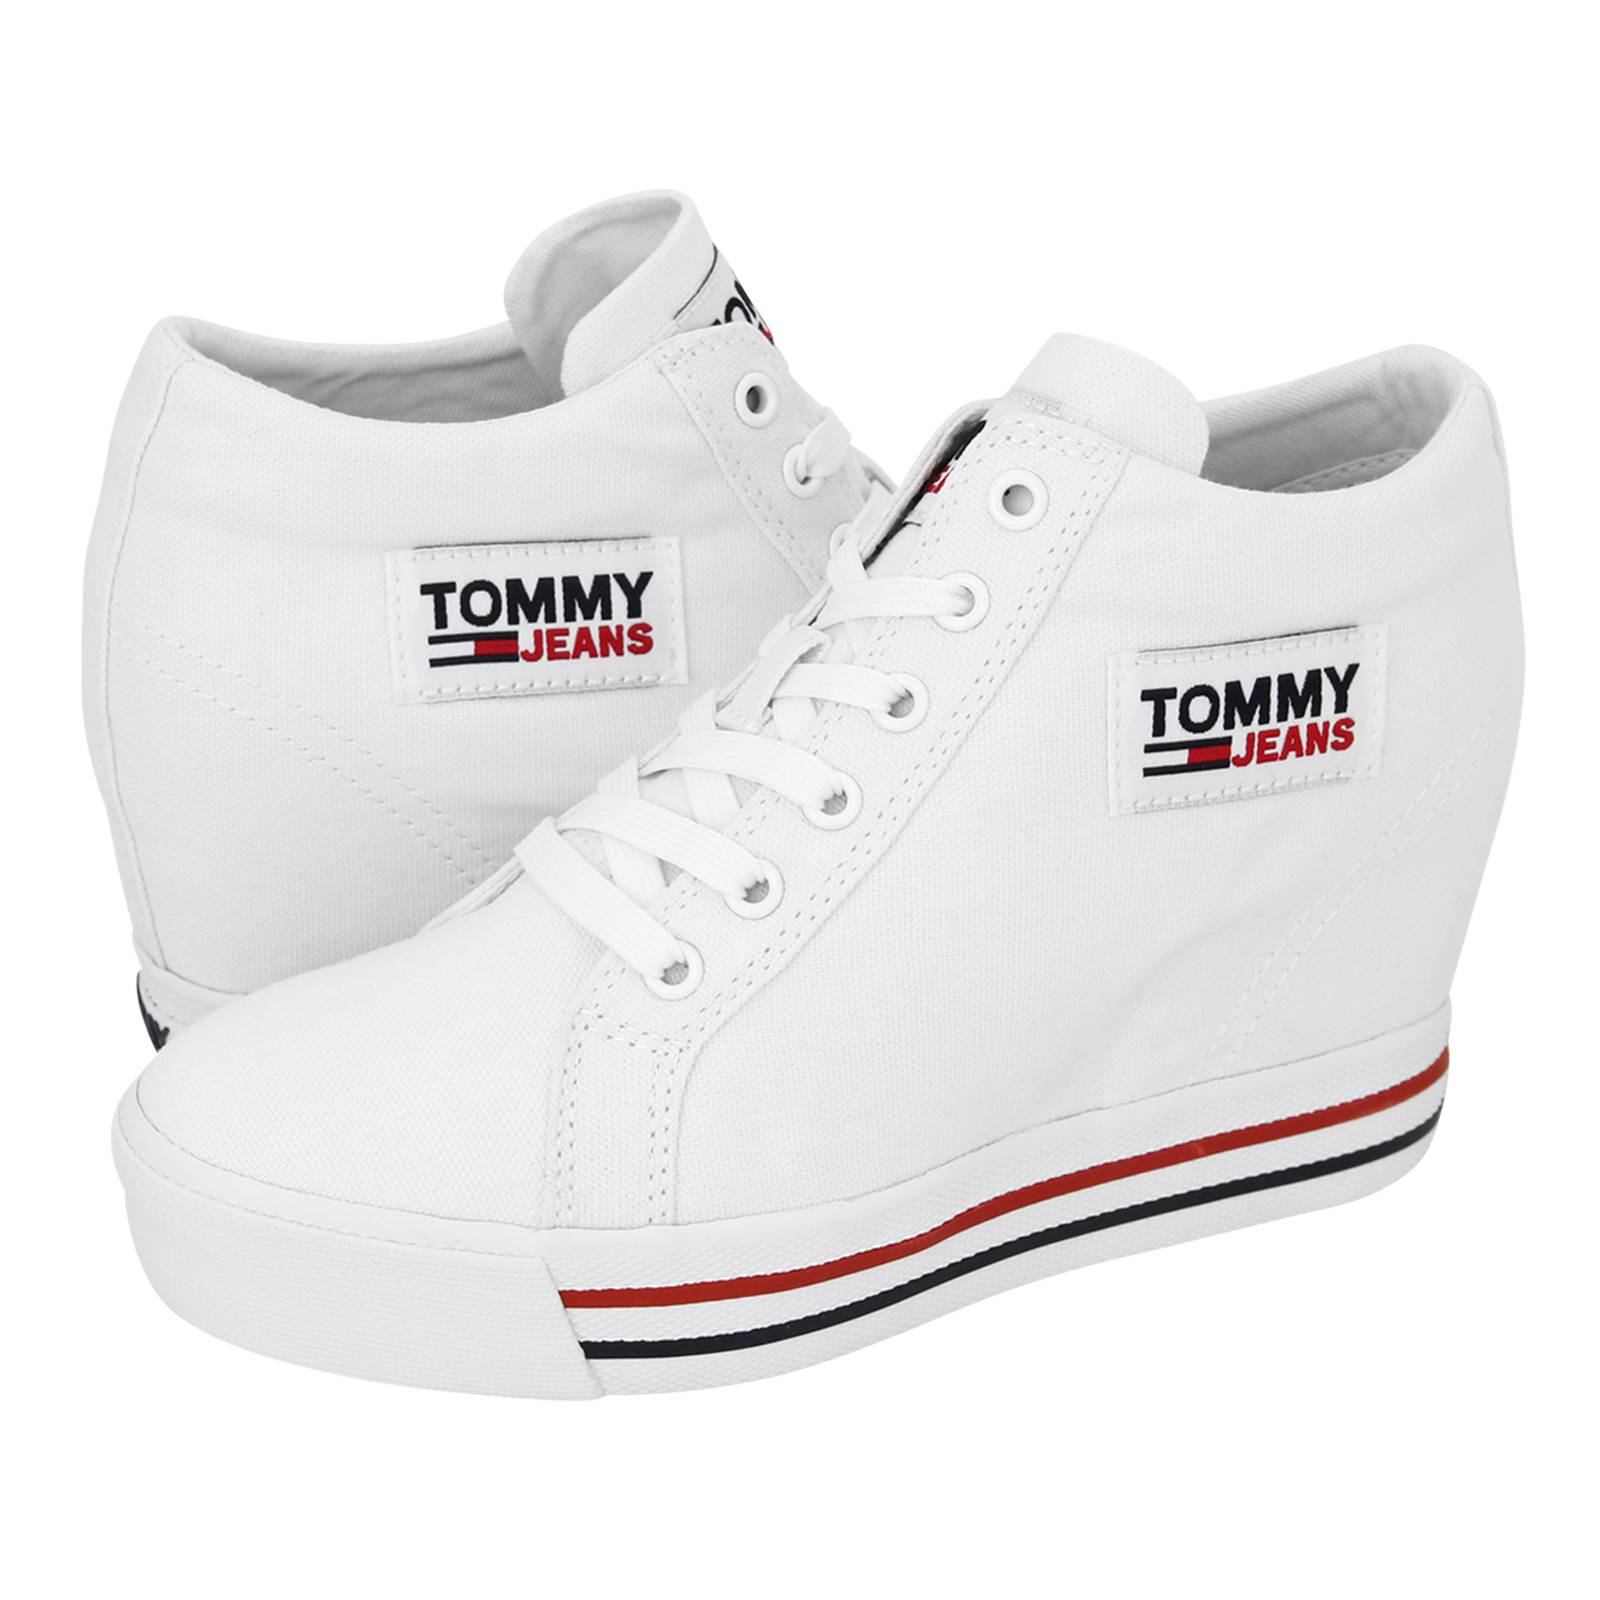 Tommy Jeans Wedge Sneaker - Tommy 